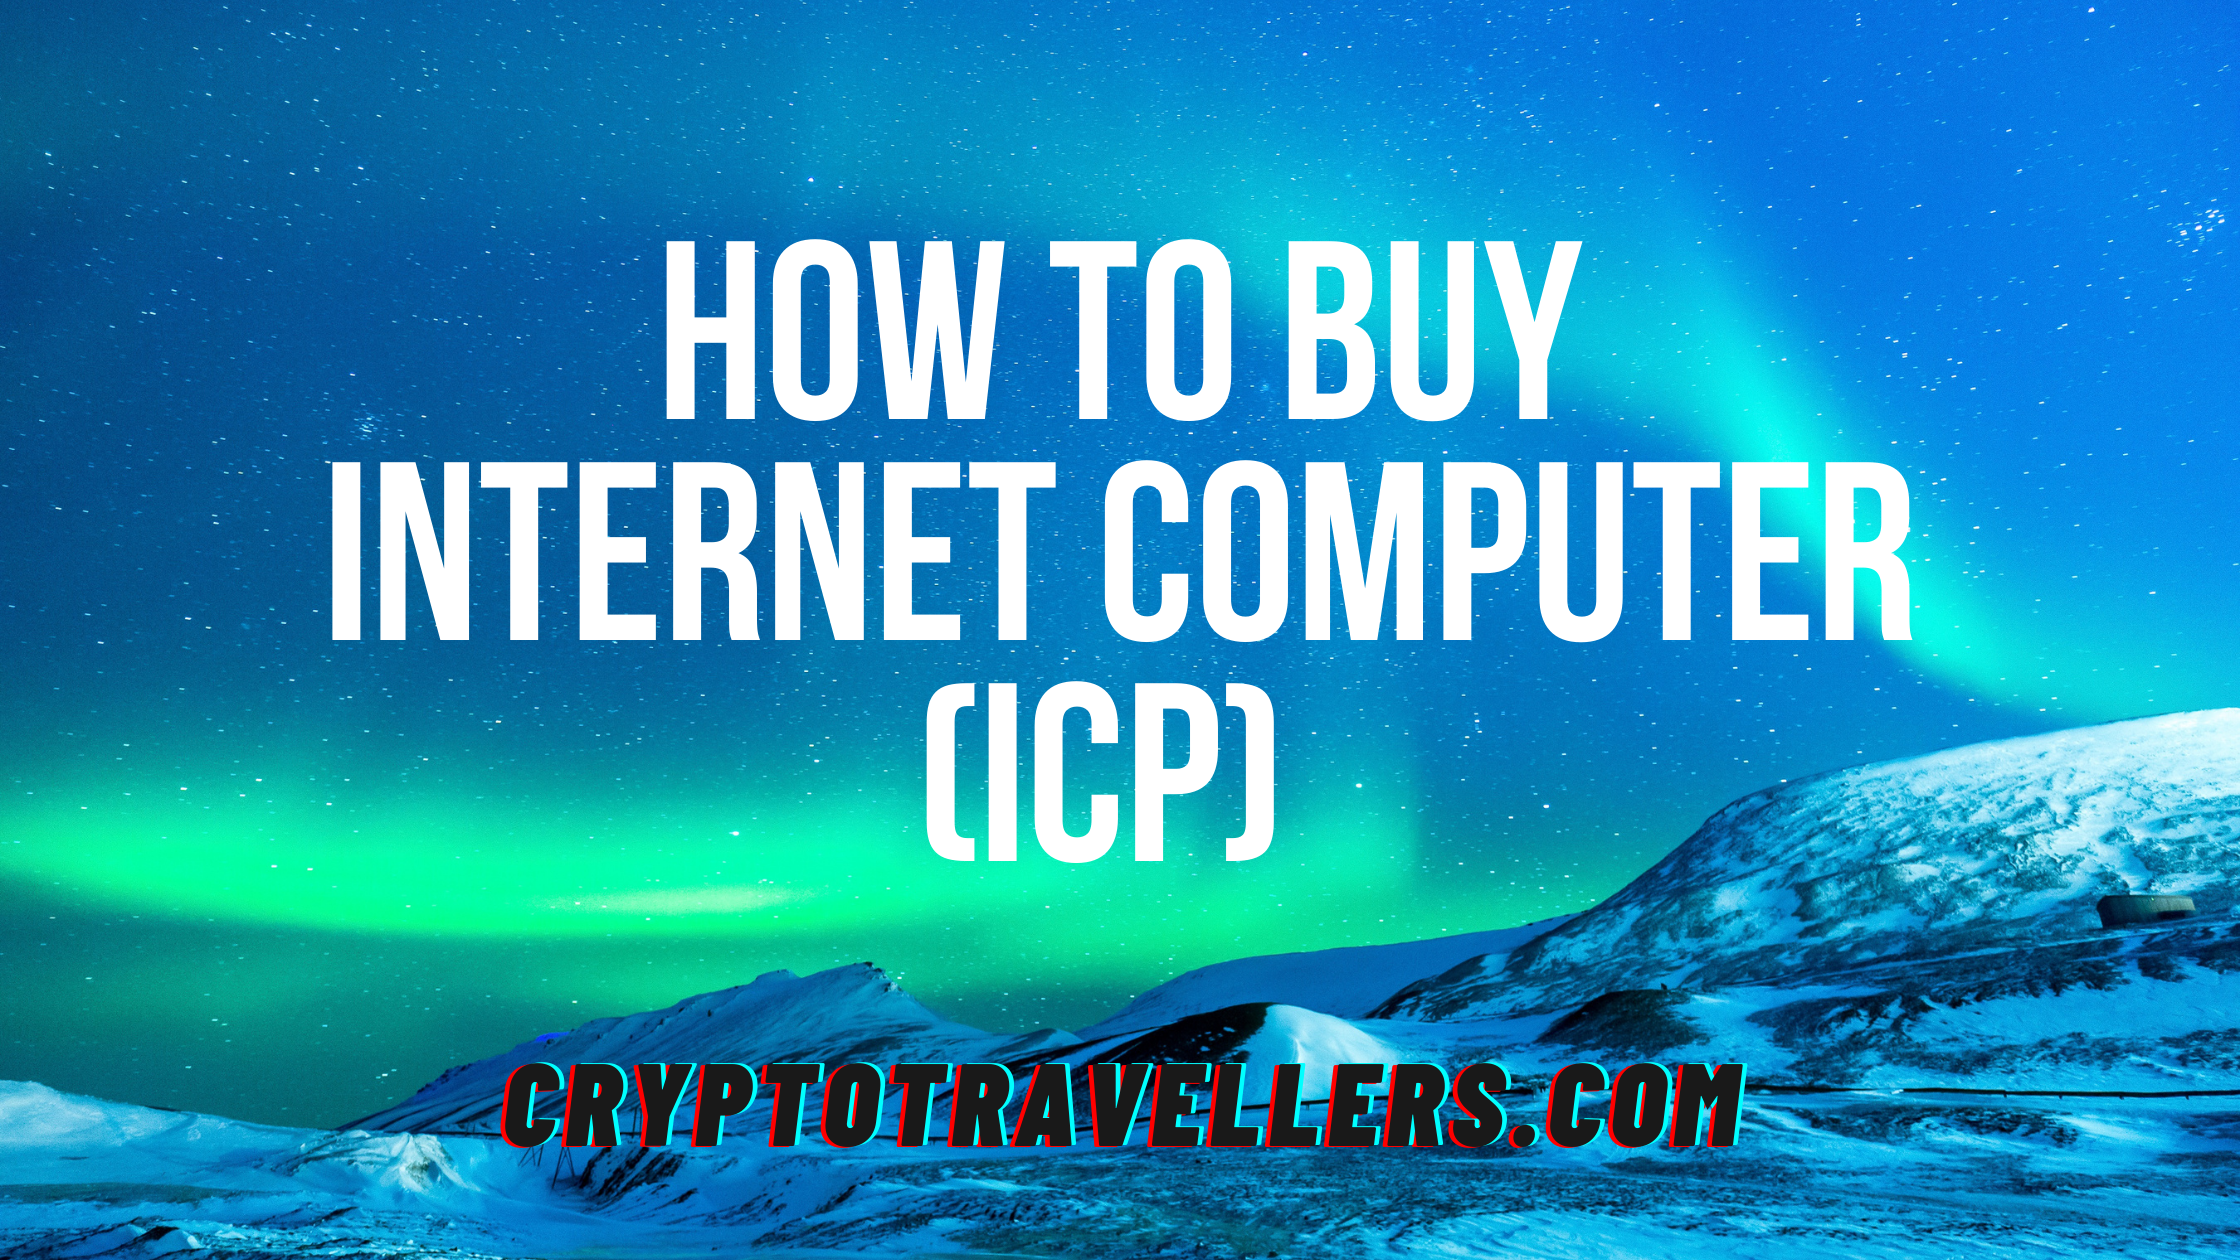 How to Buy Internet Computer (ICP)